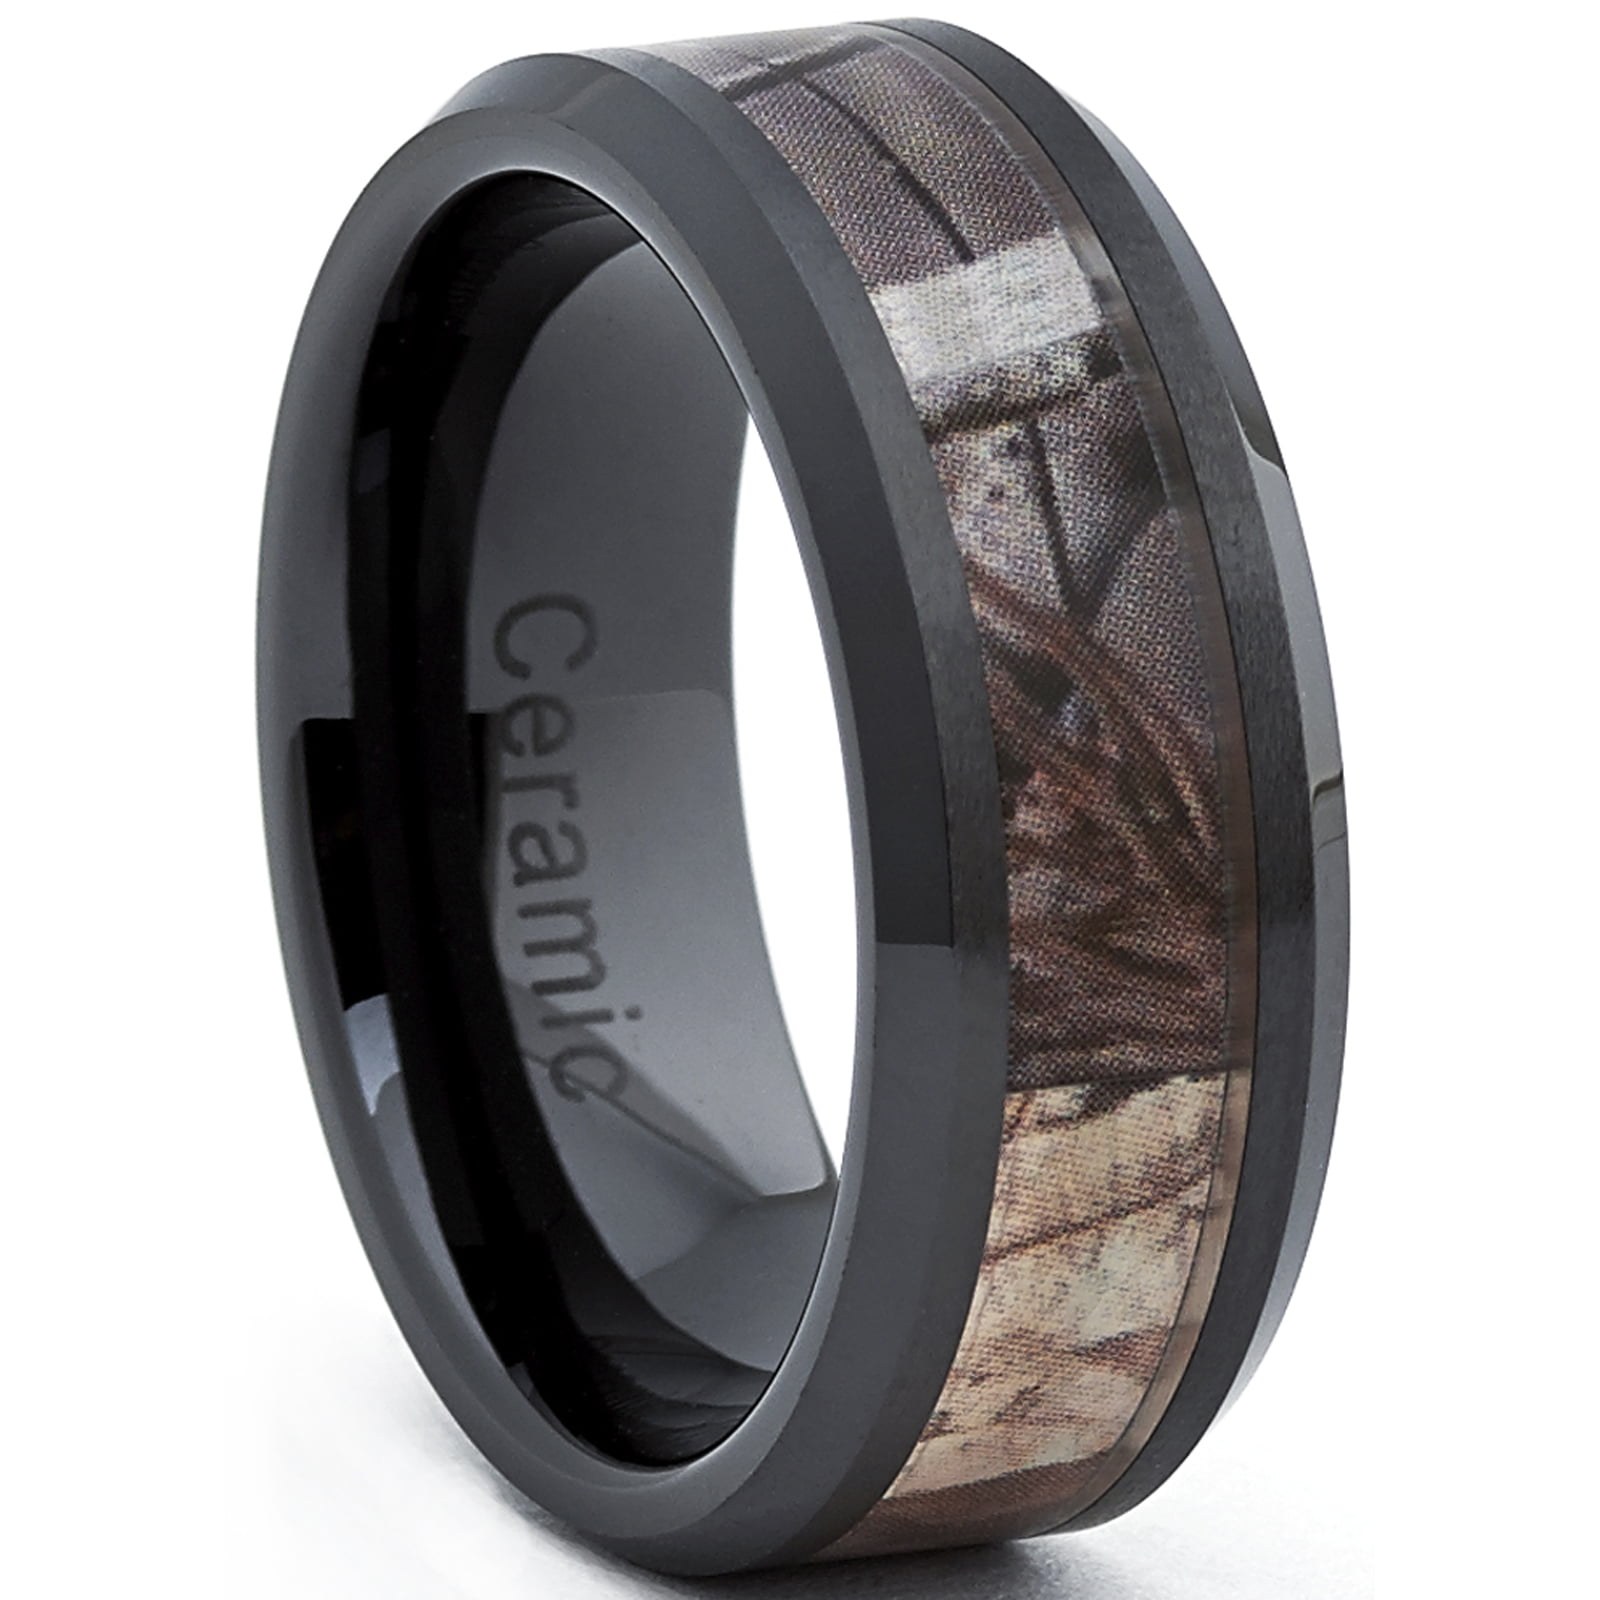 Outdoor Landscape Scenery Band 8mm Mens Black Titanium Trout Lake Fly Fishing Enthusiasts Ring